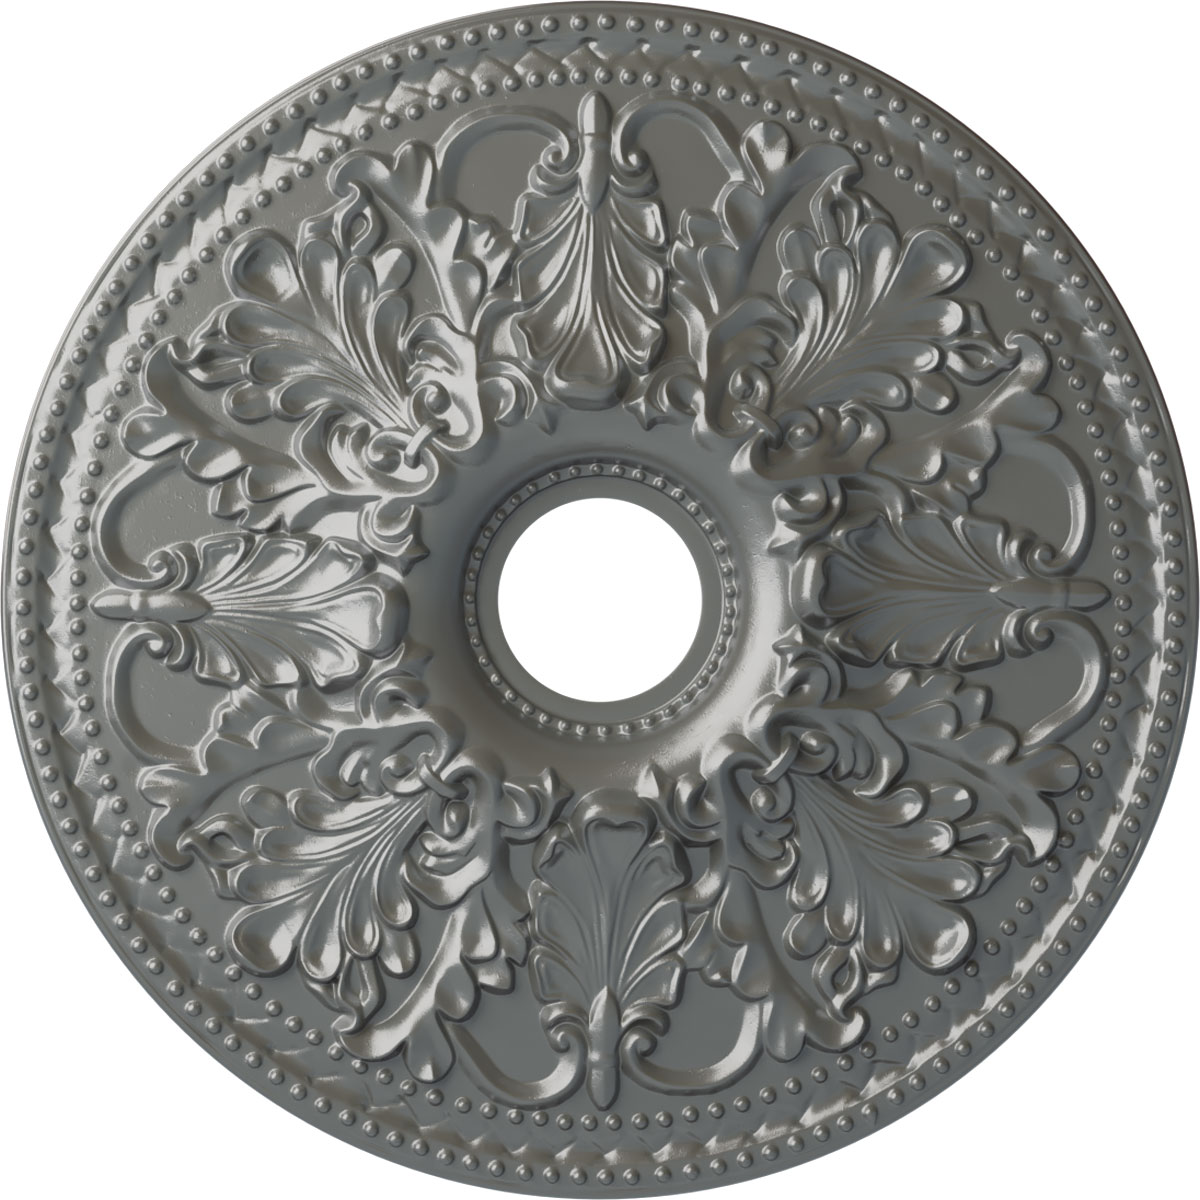 Ekena Millwork 23 7/8"OD x 4"ID x 2 1/8"P Ashley Ceiling Medallion (Fits Canopies up to 4 3/4"), Hand-Painted Silver - image 1 of 4